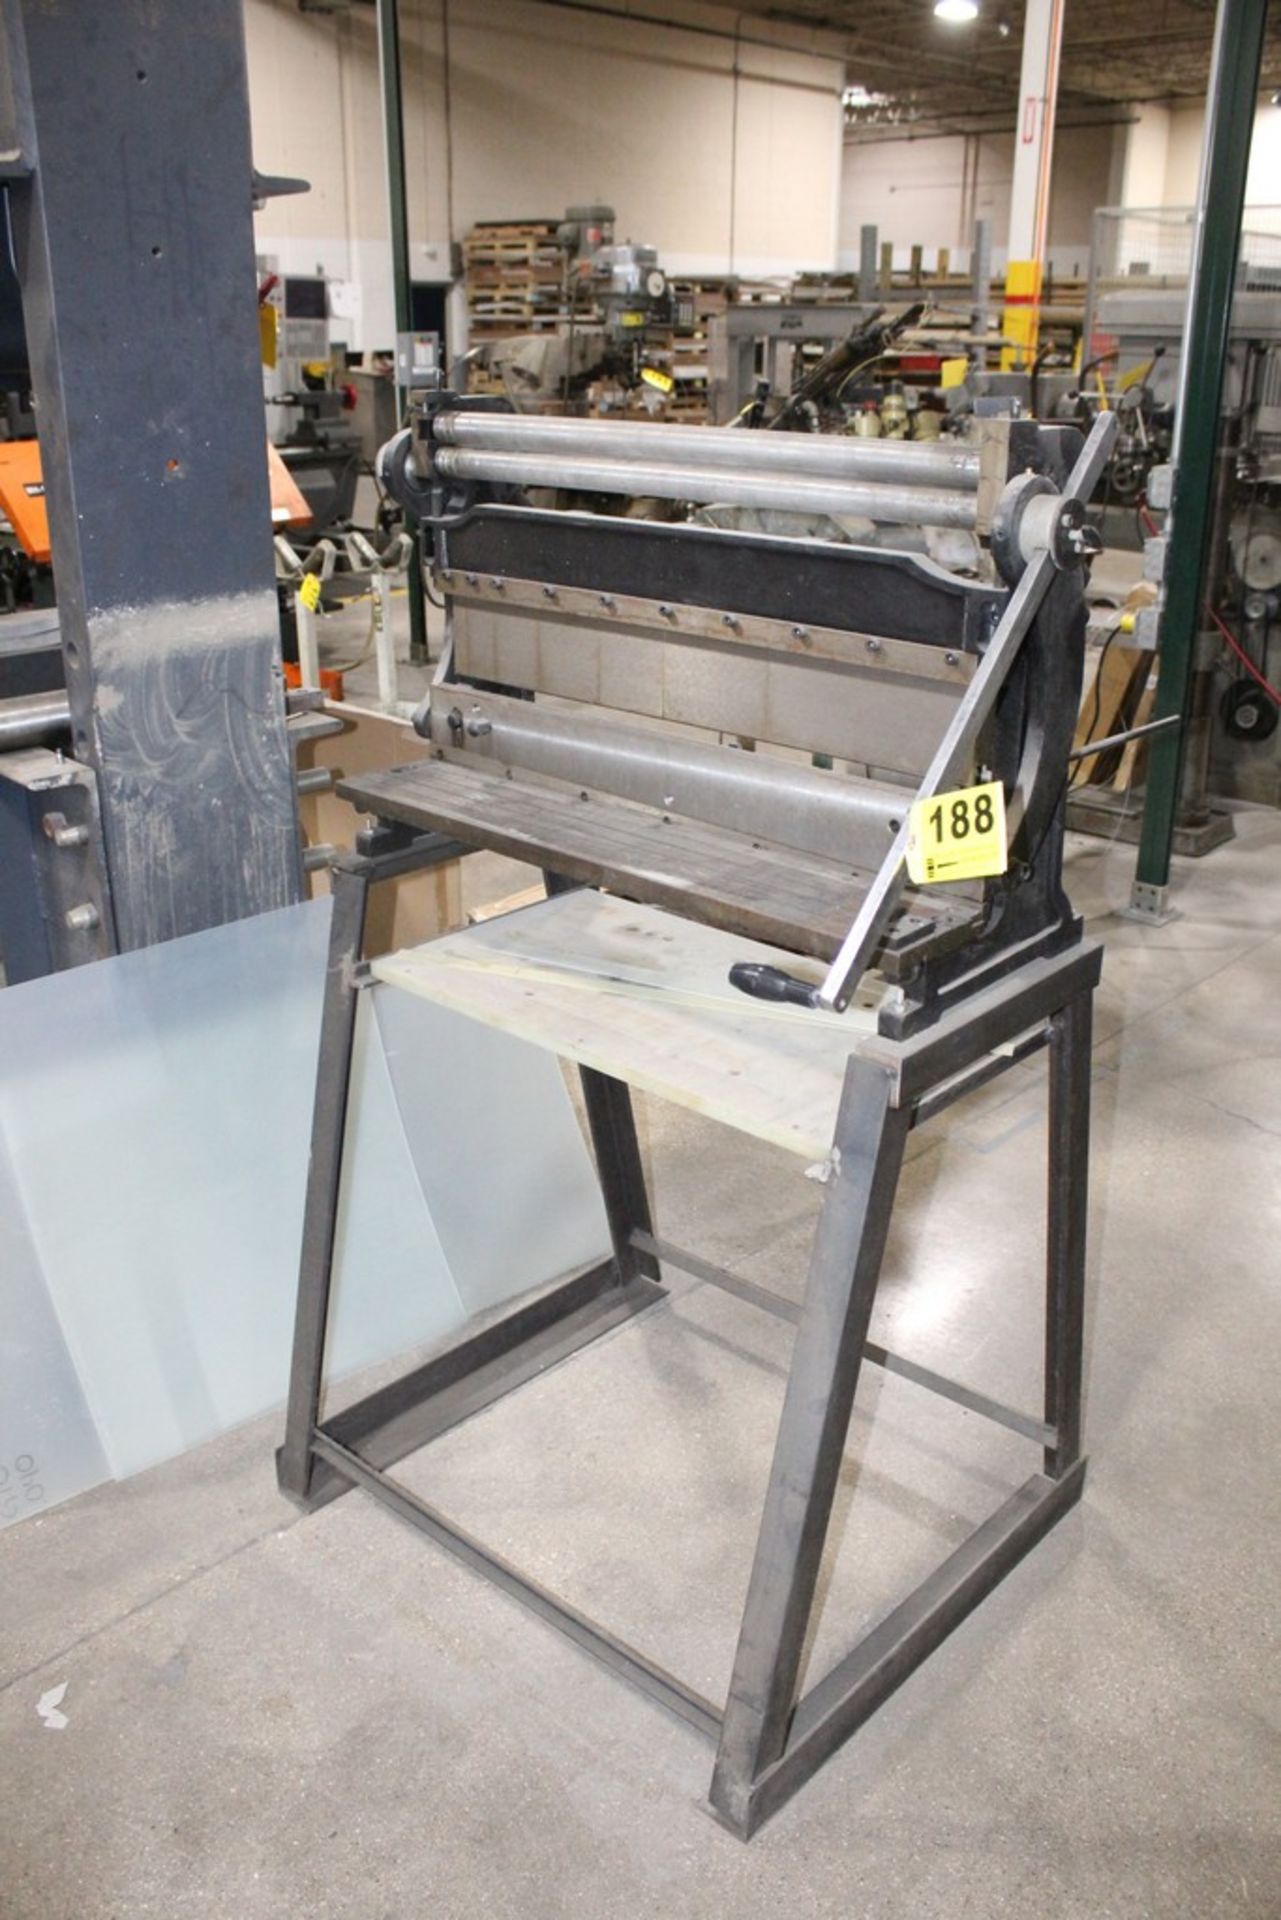 30" MANUAL PRESS BRAKE AND SHEET METAL ROLLER ON STAND LOADING FEE: $75.00